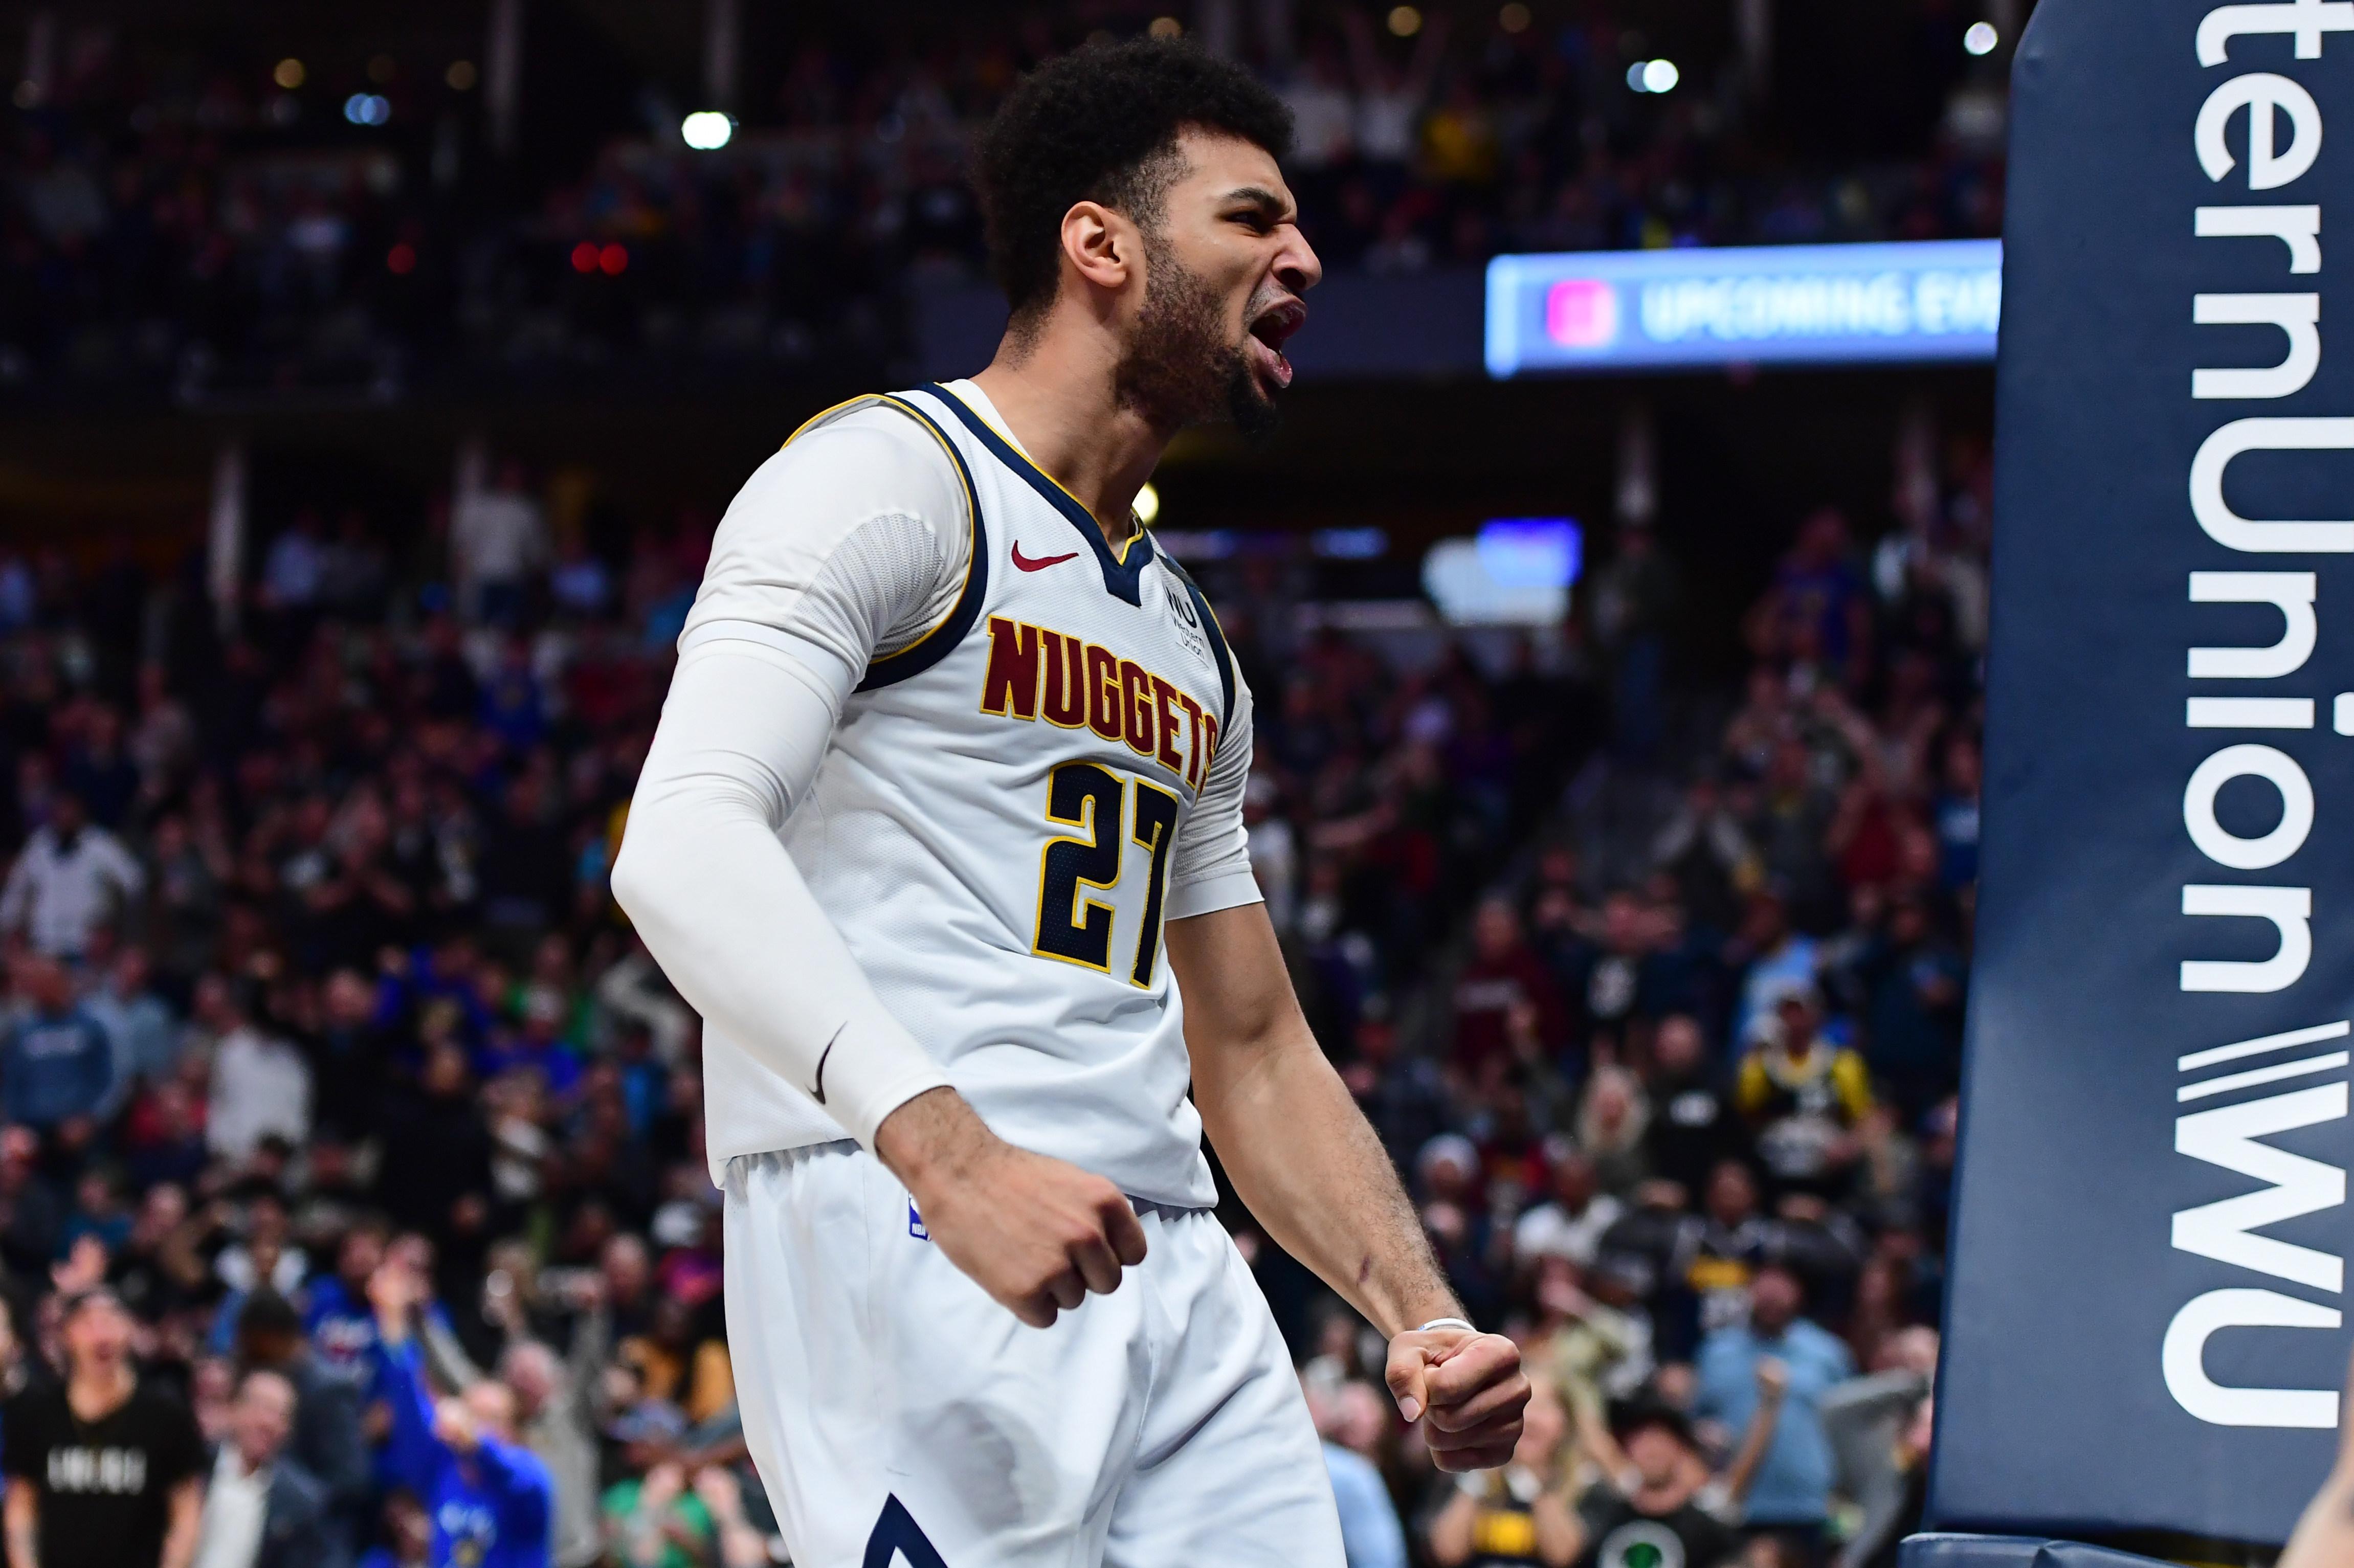 Denver Nuggets guard Jamal Murray (27) reacts following his basket in the third quarter against the Milwaukee Bucks at the Pepsi Center.